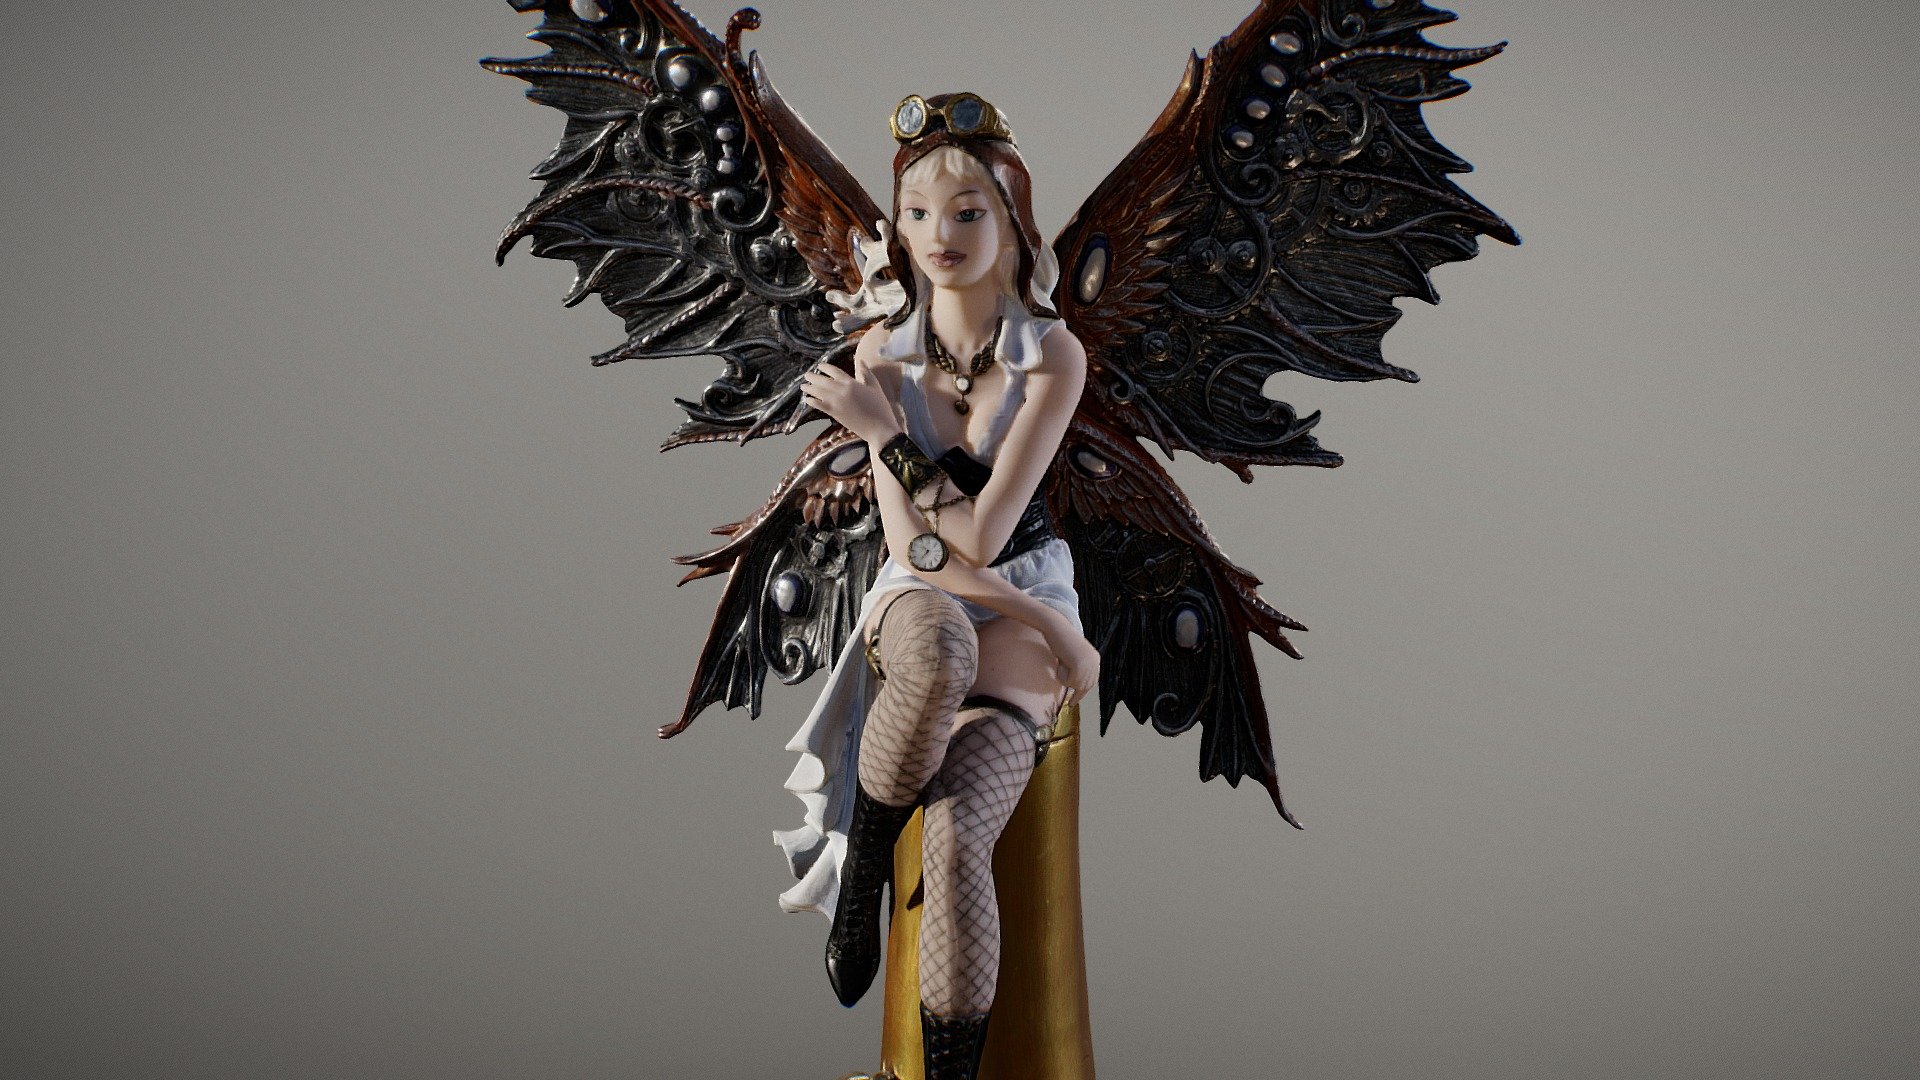 ** Steampunk Aviator Fairy **

Pacific Giftware 11.38 Inch Aviator Steampunk Large Winged Fairy Statue Figurine

23.5 x 10.9 x 28.1 cm (103 micrometers per texel @ 4k)

Scanned using advanced technology developed by inciprocal Inc. that enables highly photo-realistic reproduction of real-world products in virtual environments. Our hardware and software technology combines advanced photometry, structured light, photogrammtery and light fields to capture and generate accurate material representations from tens of thousands of images targeting real-time and offline path-traced PBR compatible renderers.

Zip file includes low-poly OBJ mesh (in meters) with a set of 4k PBR textures compressed with lossless JPEG (no chroma sub-sampling) 3d model